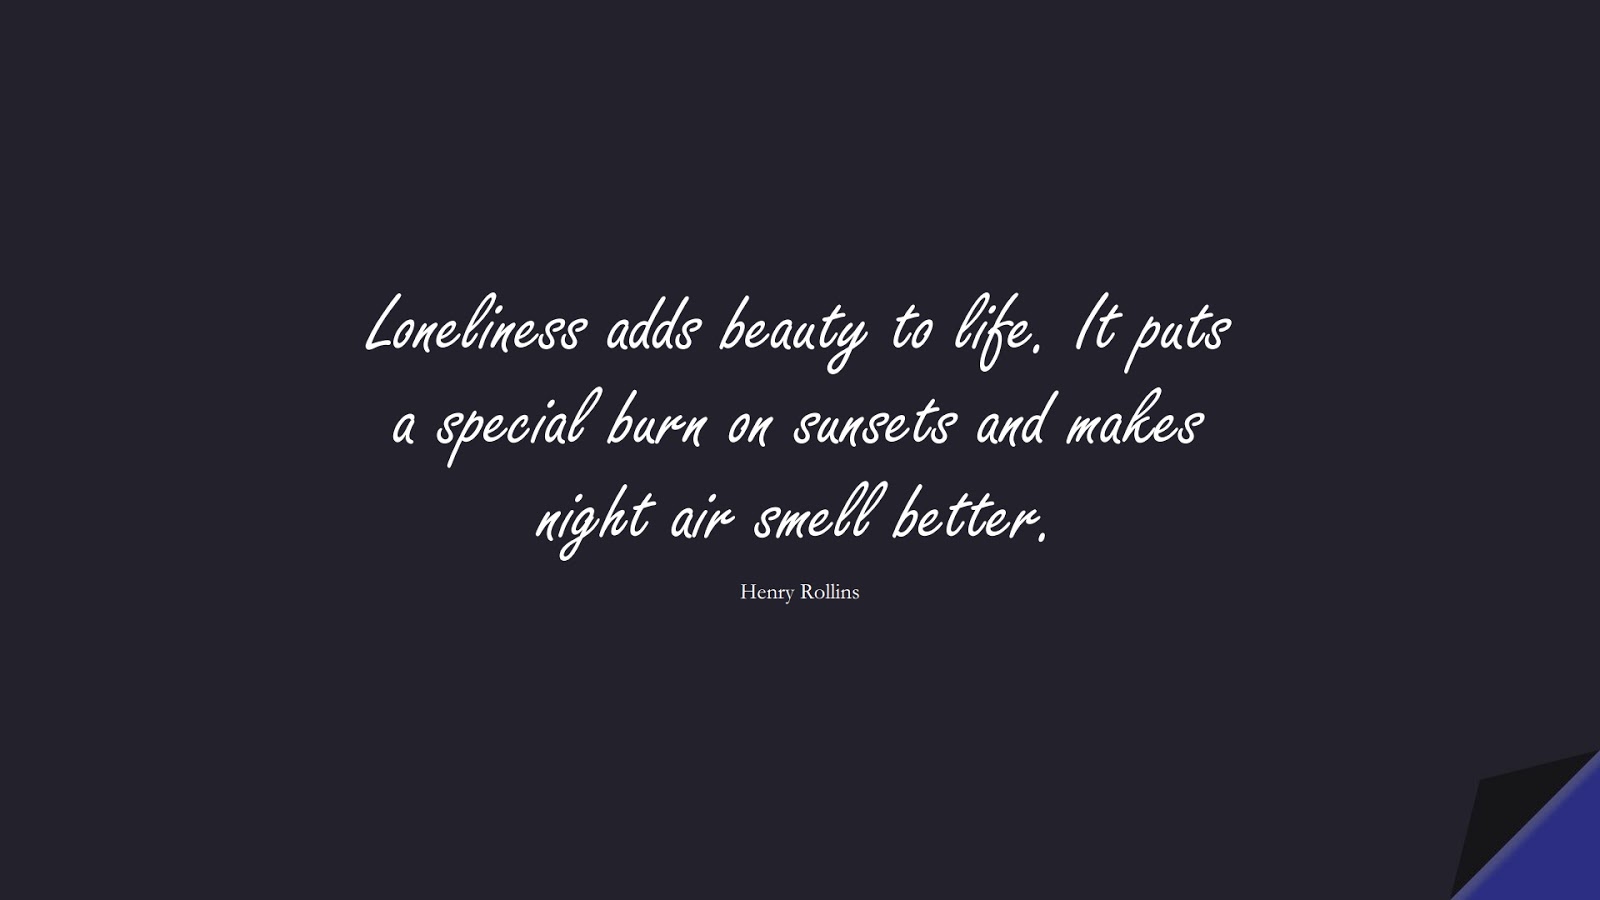 Loneliness adds beauty to life. It puts a special burn on sunsets and makes night air smell better. (Henry Rollins);  #PricelessQuotes